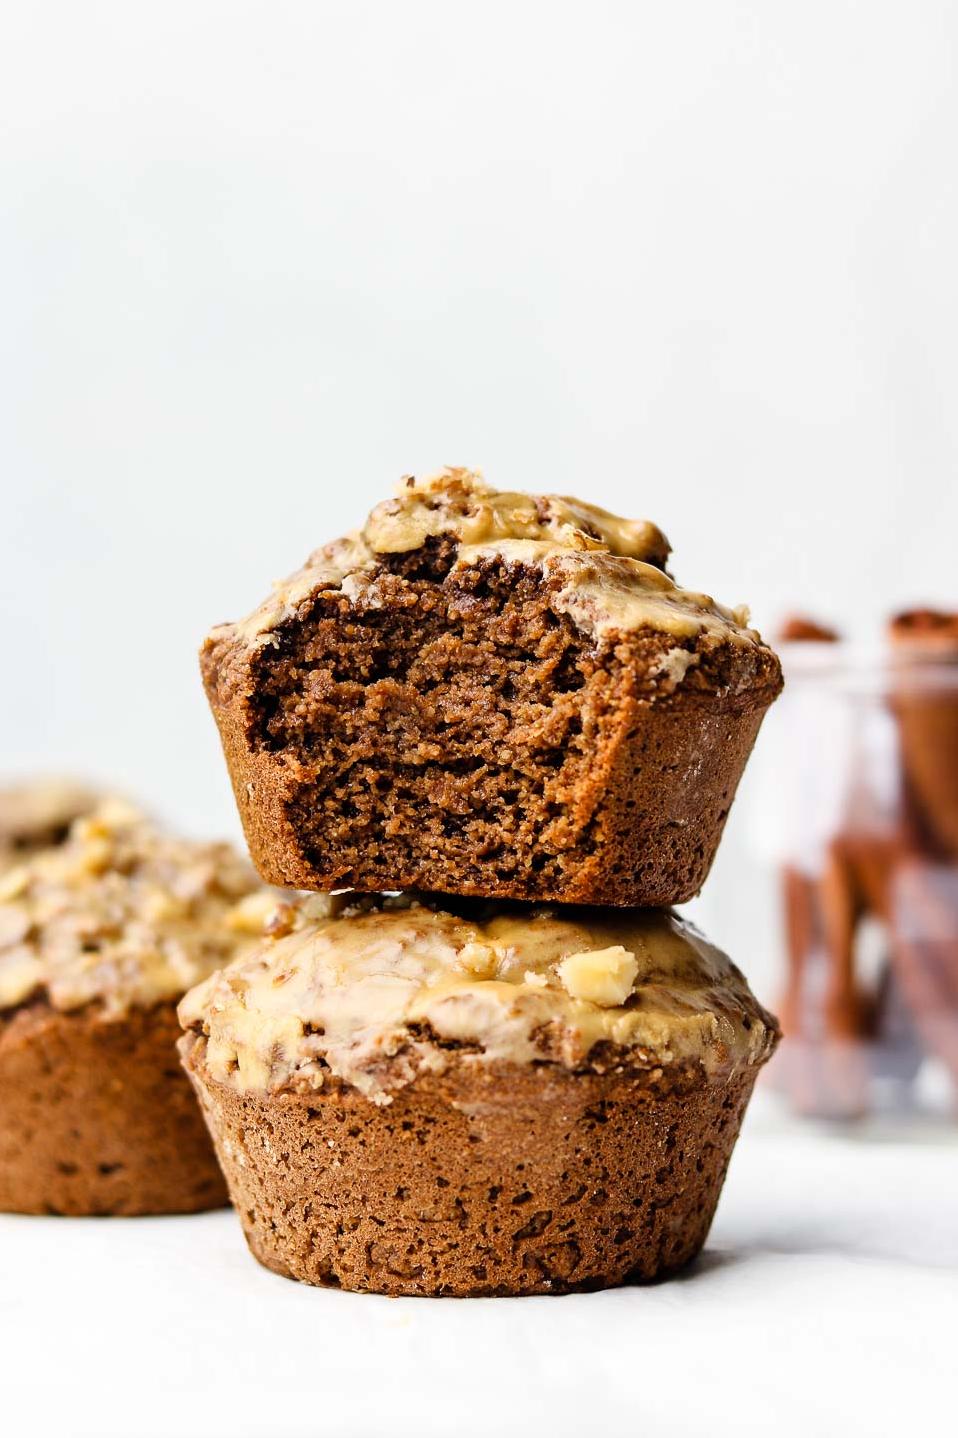  Fluffy and moist muffins, filled with warm chai spice.